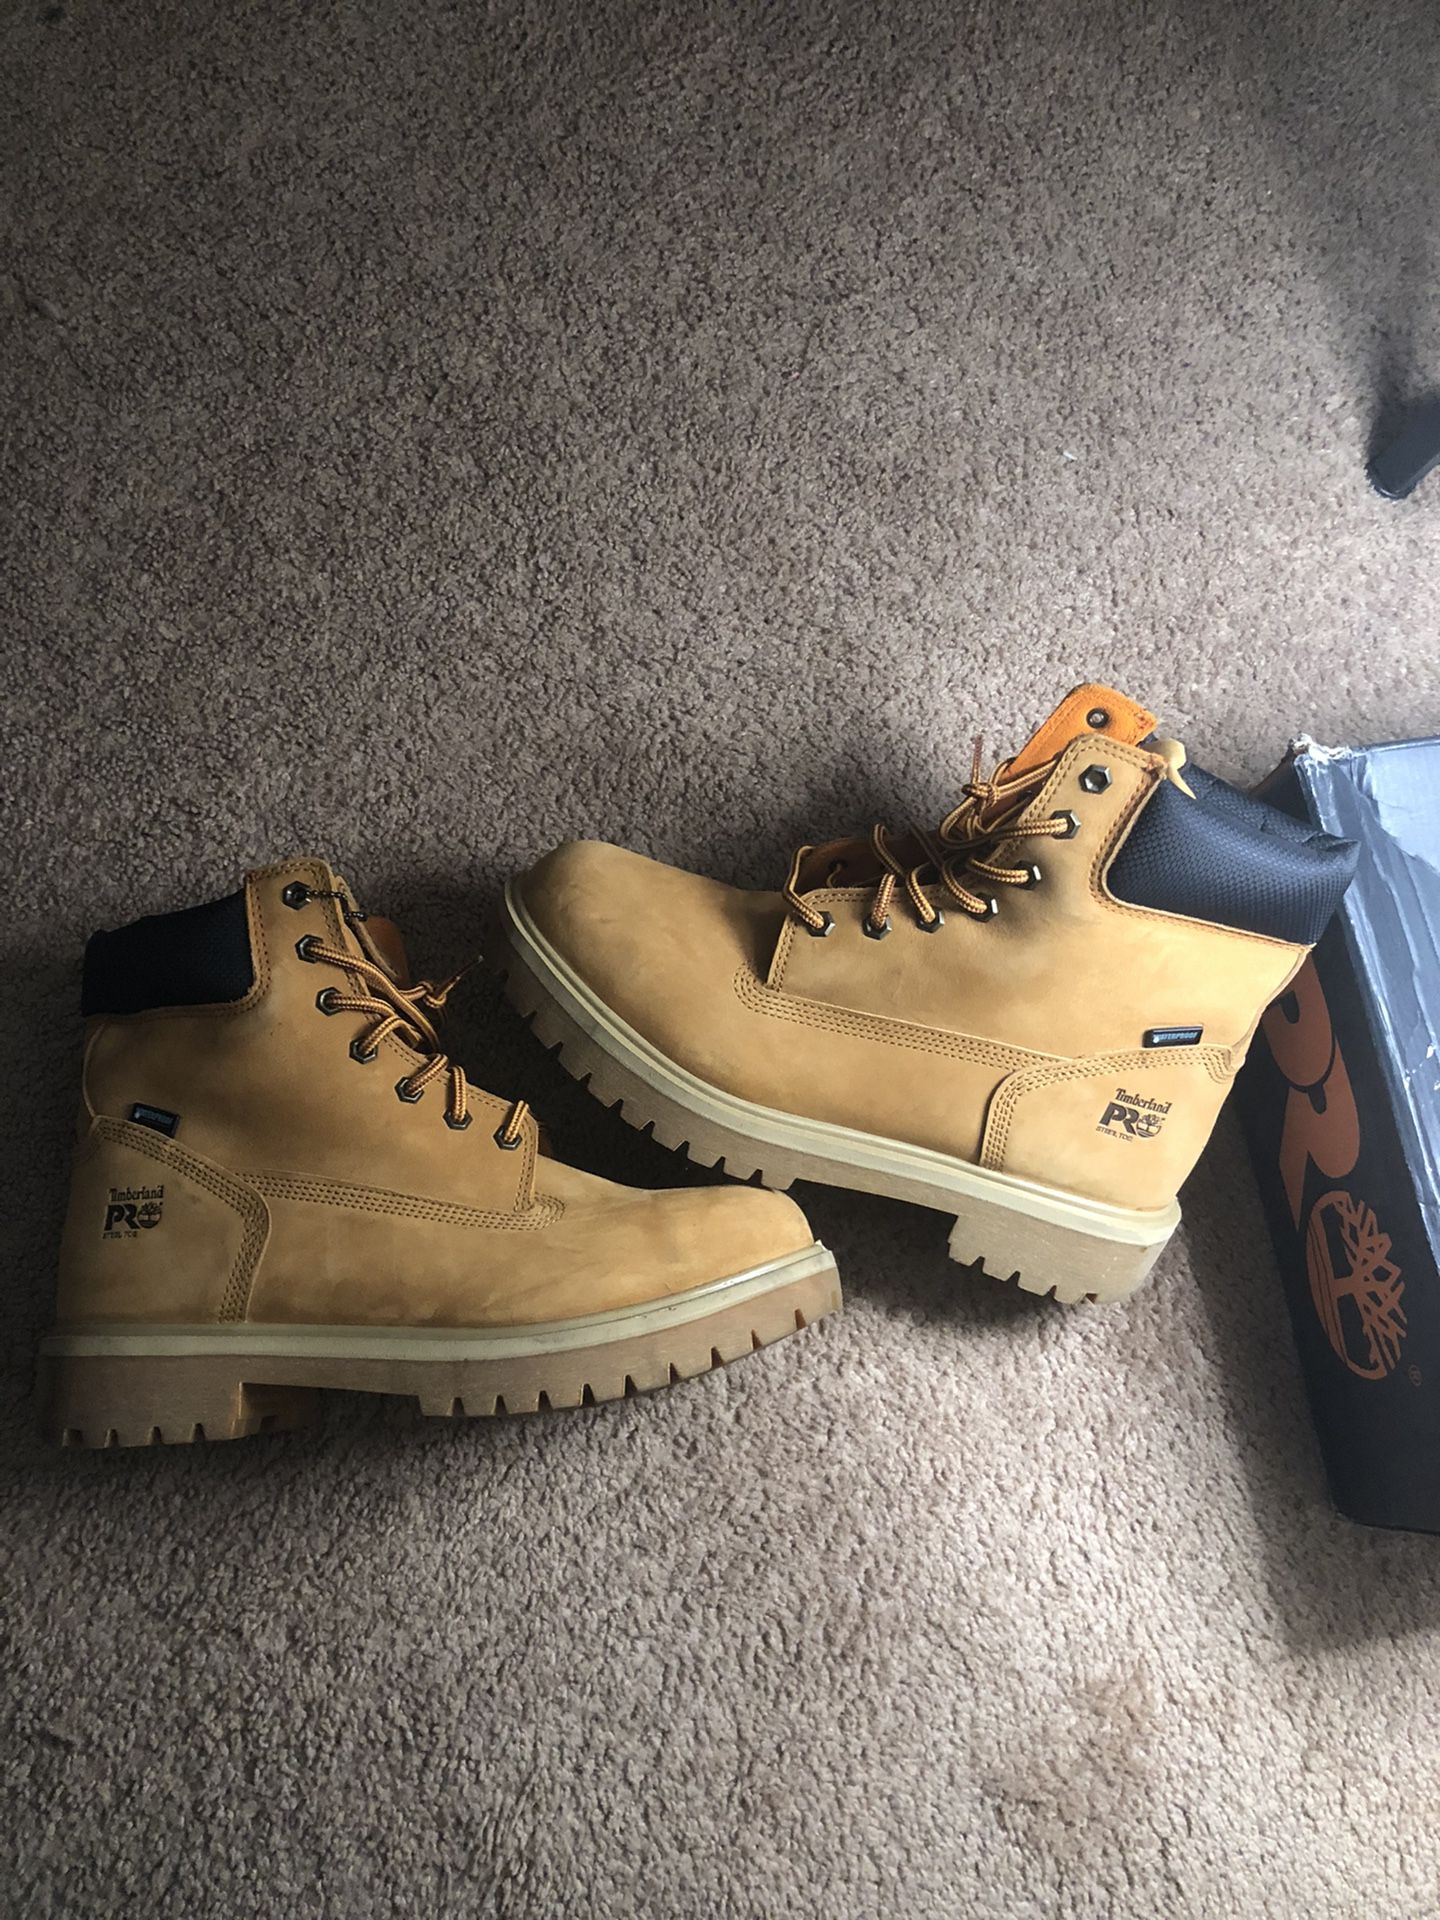 Timberland PRO Men’s Boot Shoes Size 12(Free Gift Included)